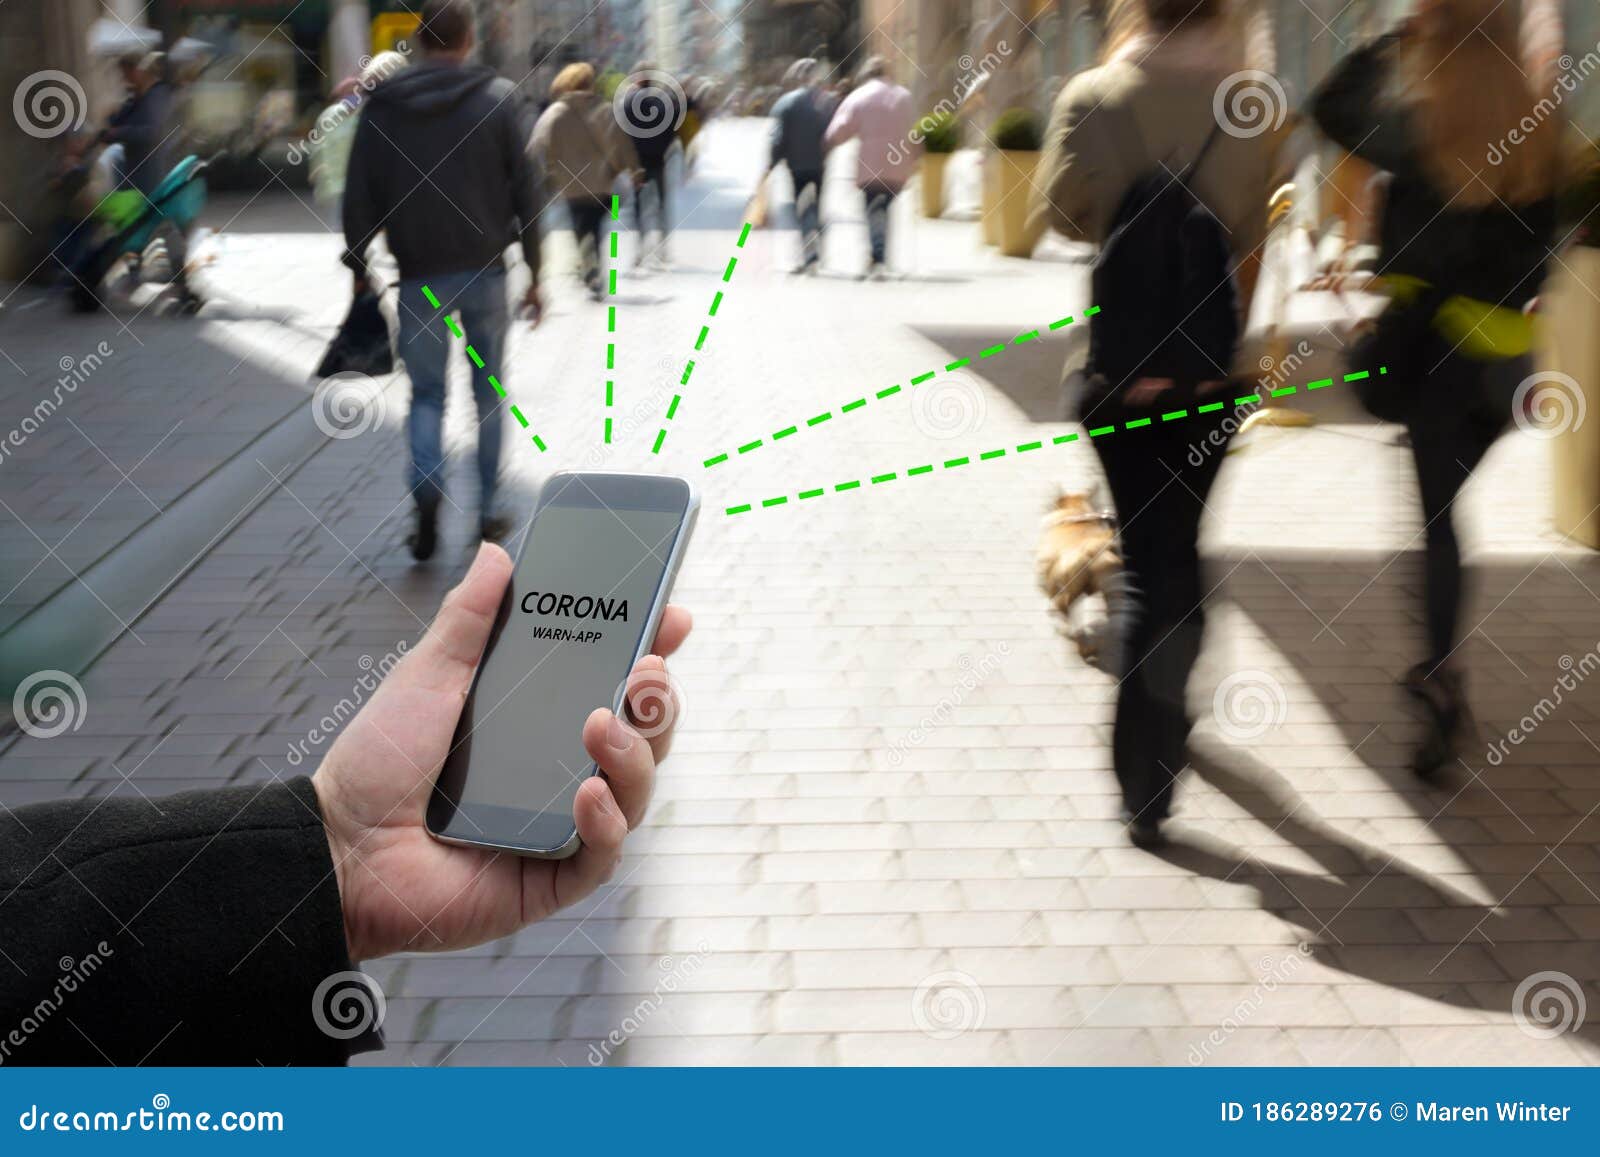 smart phone with corona warn app, the contact tracking or tracing application against covid 19 pandemic is connecting other phones